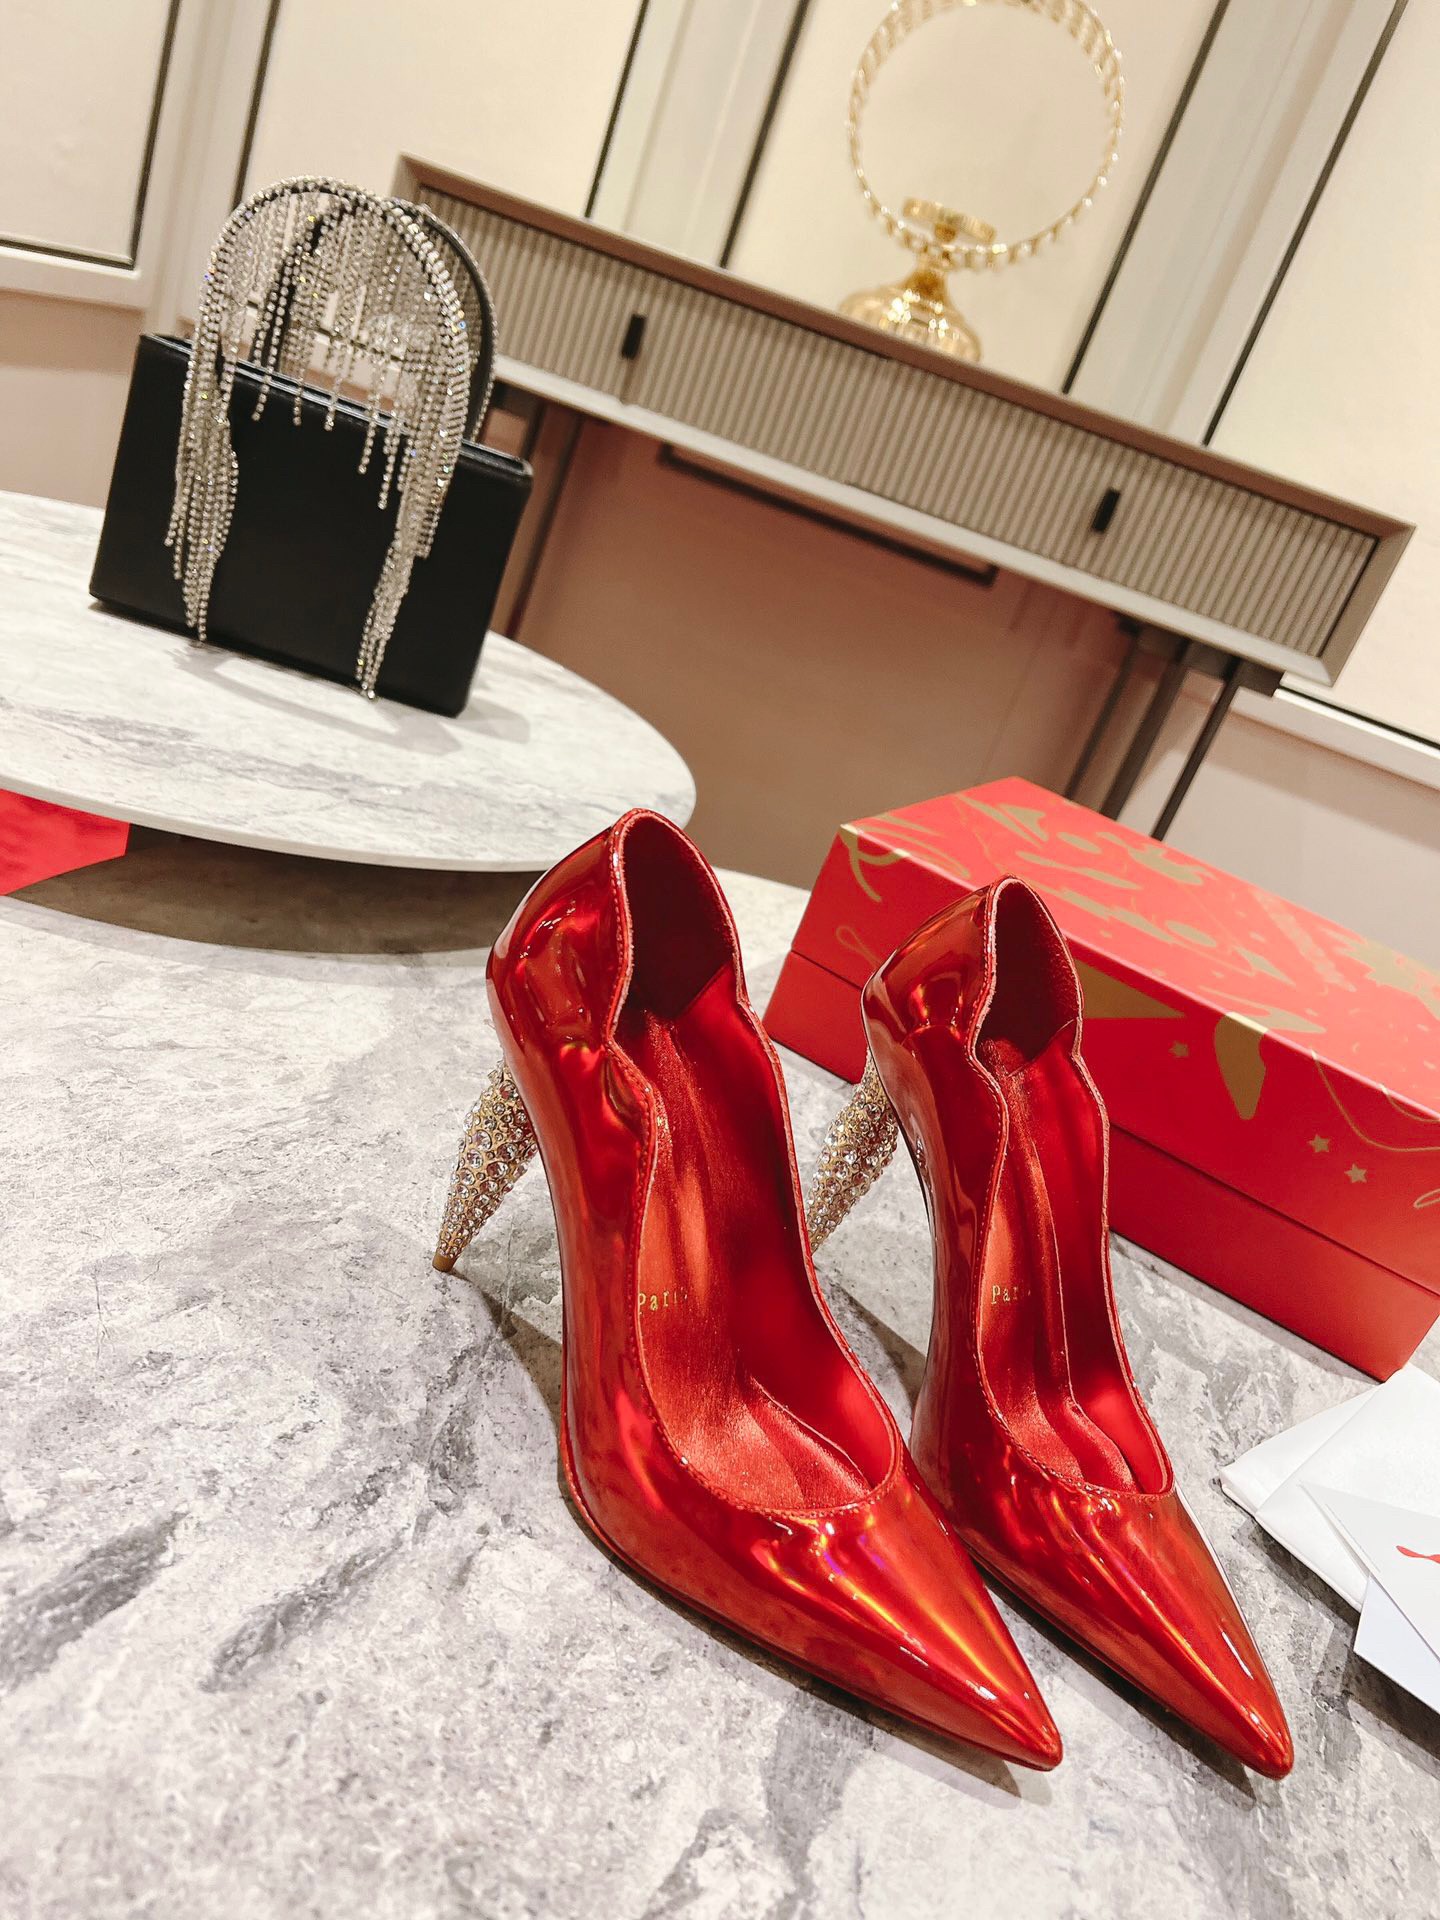 Replica Christian Louboutin Lipstrass Pumps 100mm In Red Patent Leather